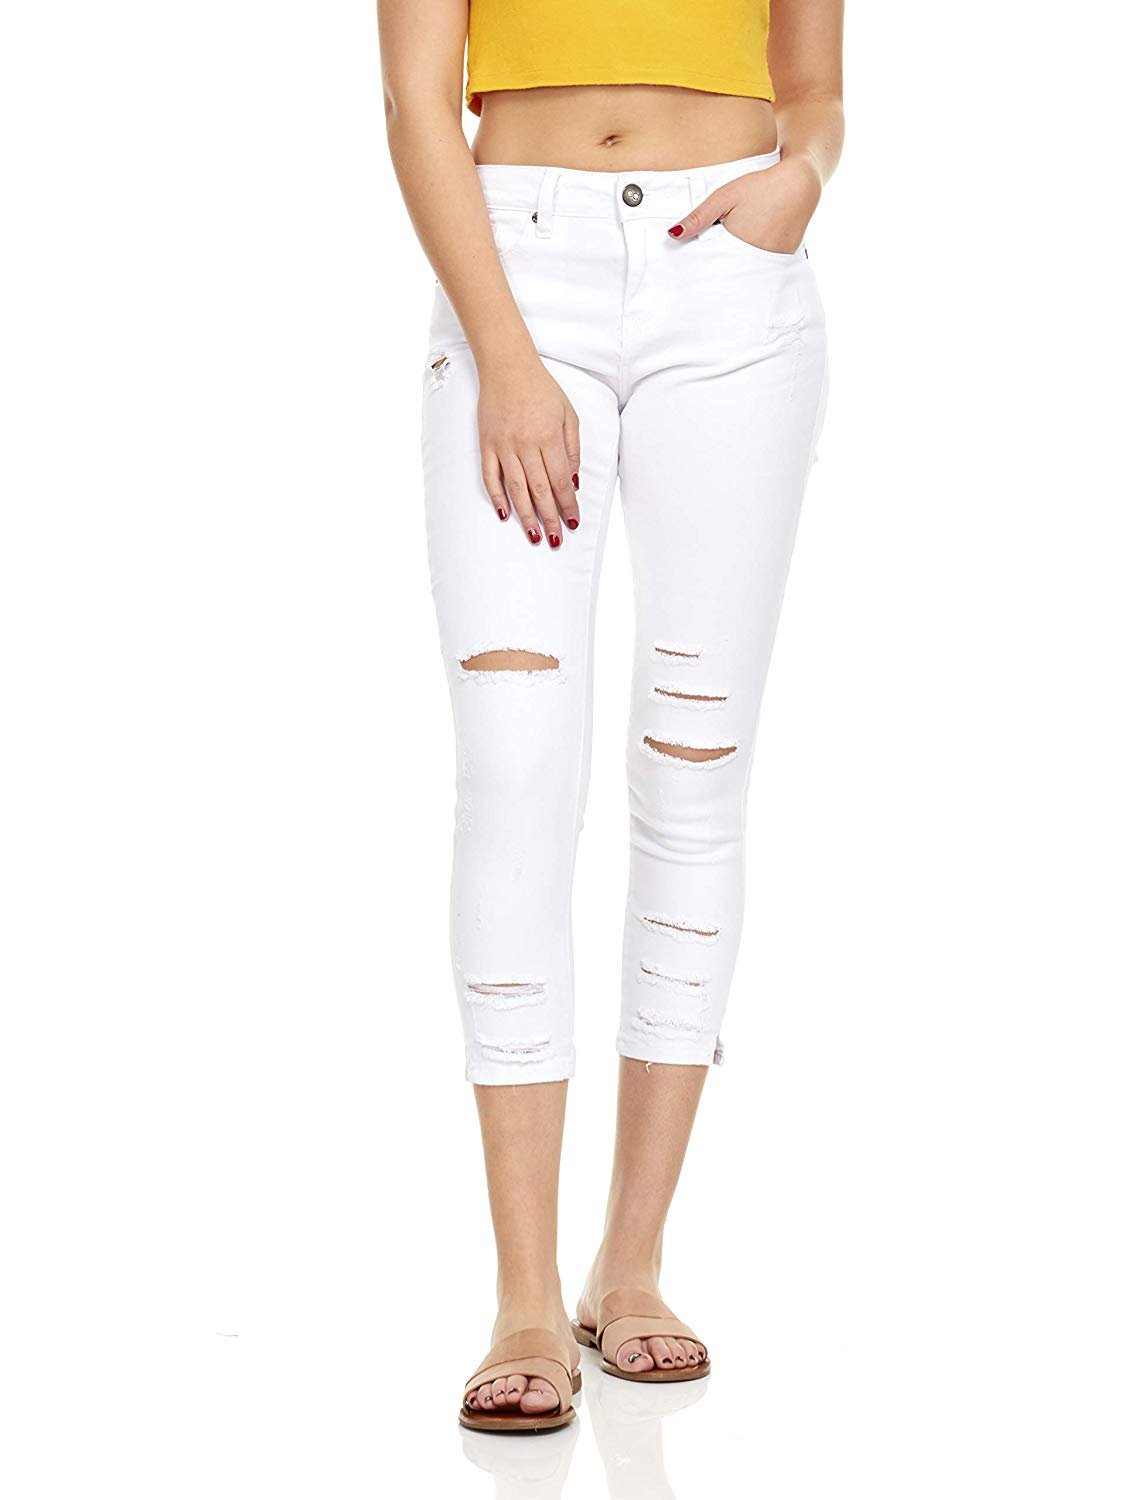 YDX Smart Jeans High Waisted Casual Stretchy Comfy Ripped Cropped Hem Pants White Wash Size Juniors 1 - image 1 of 5